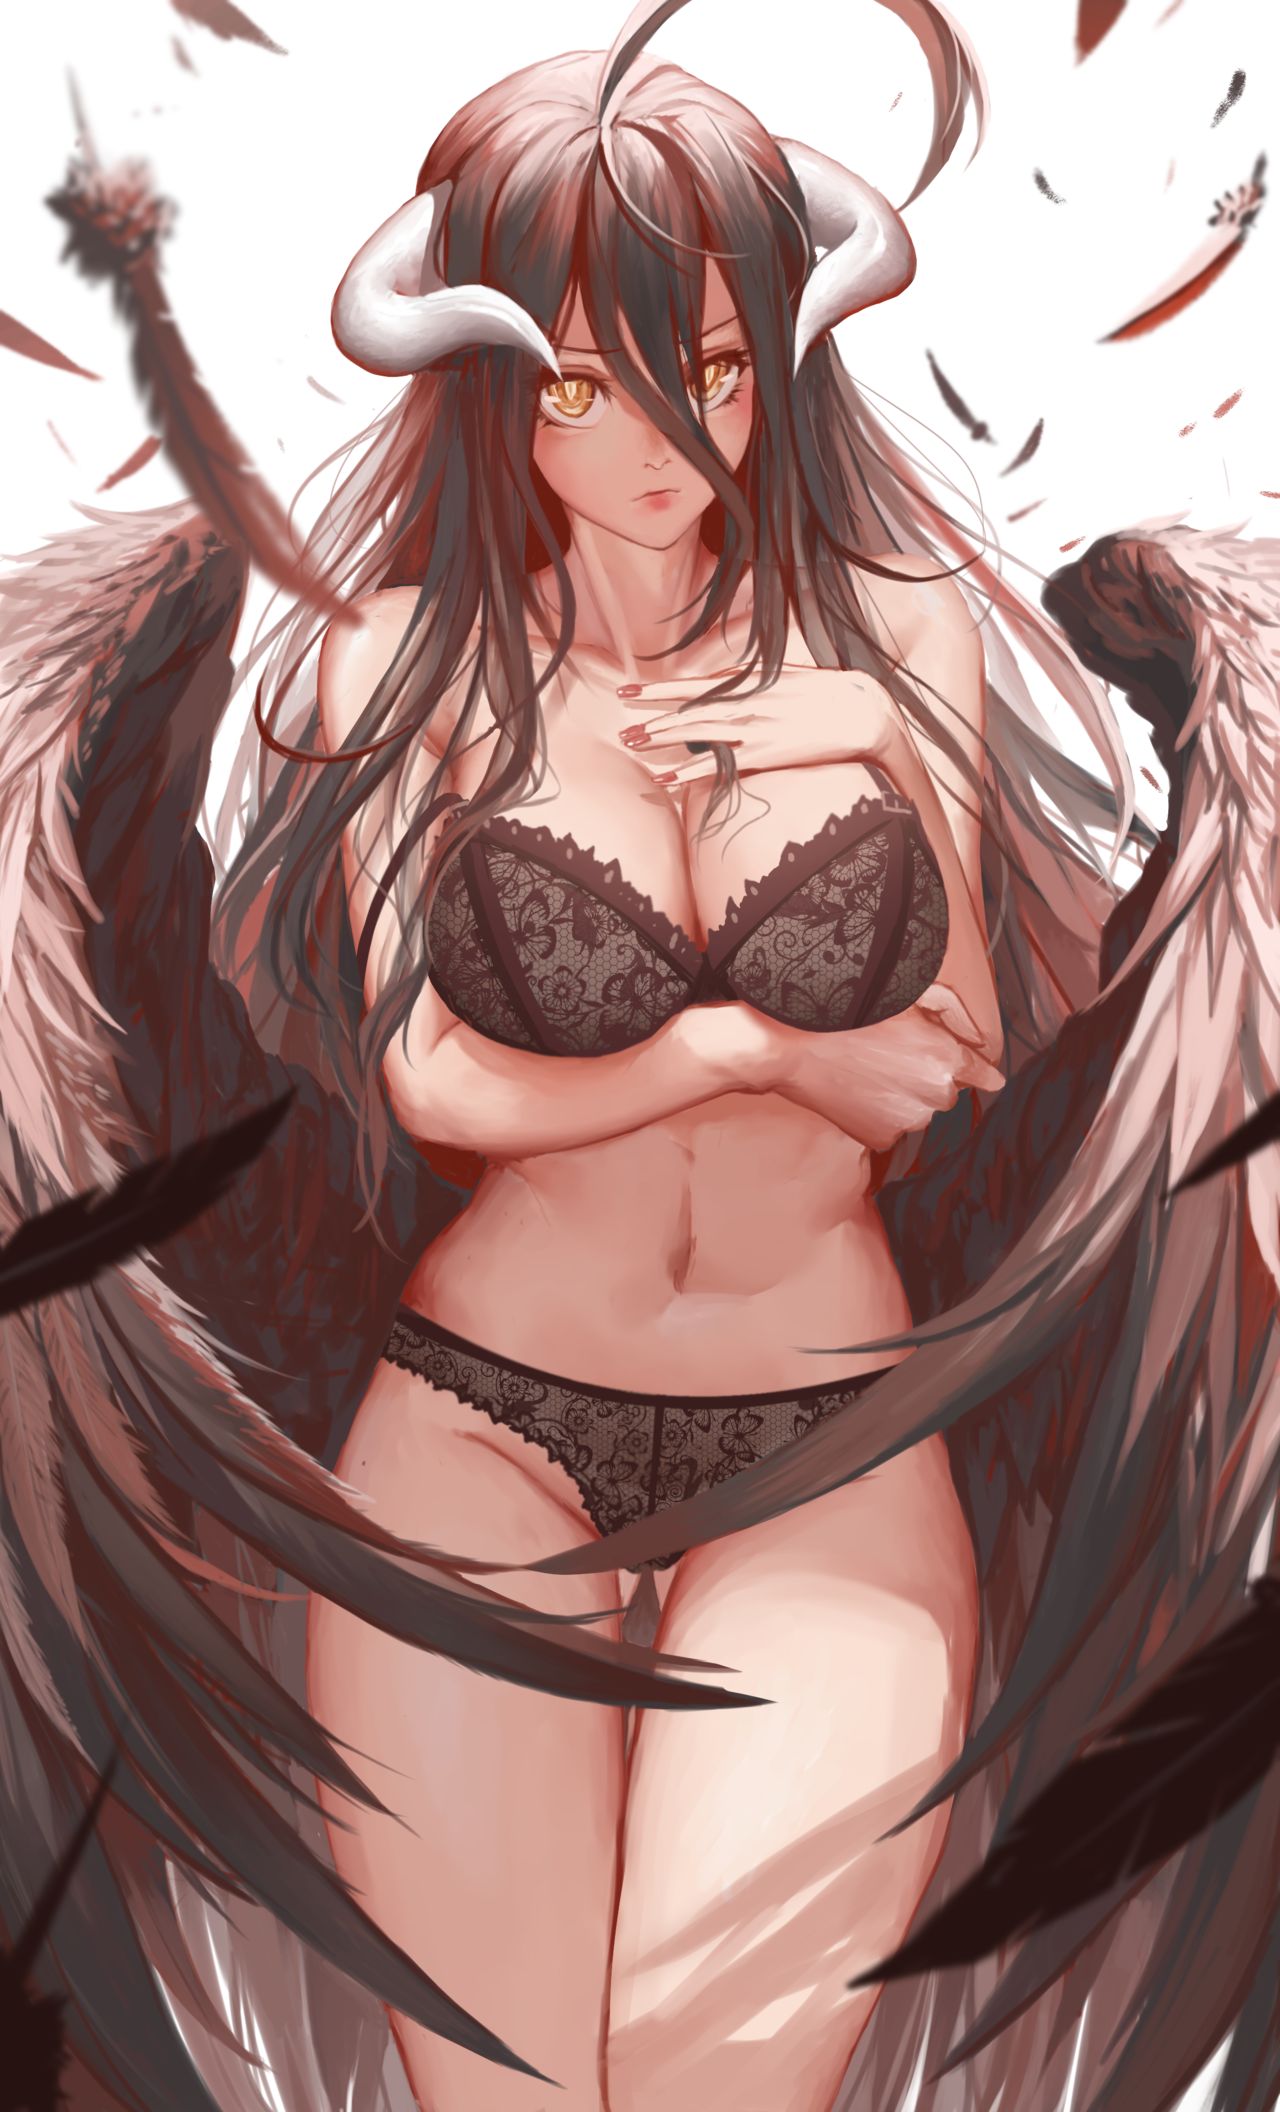 Dishwasher Cleavage Anime Girls Portrait Display Albedo OverLord Horns Wings